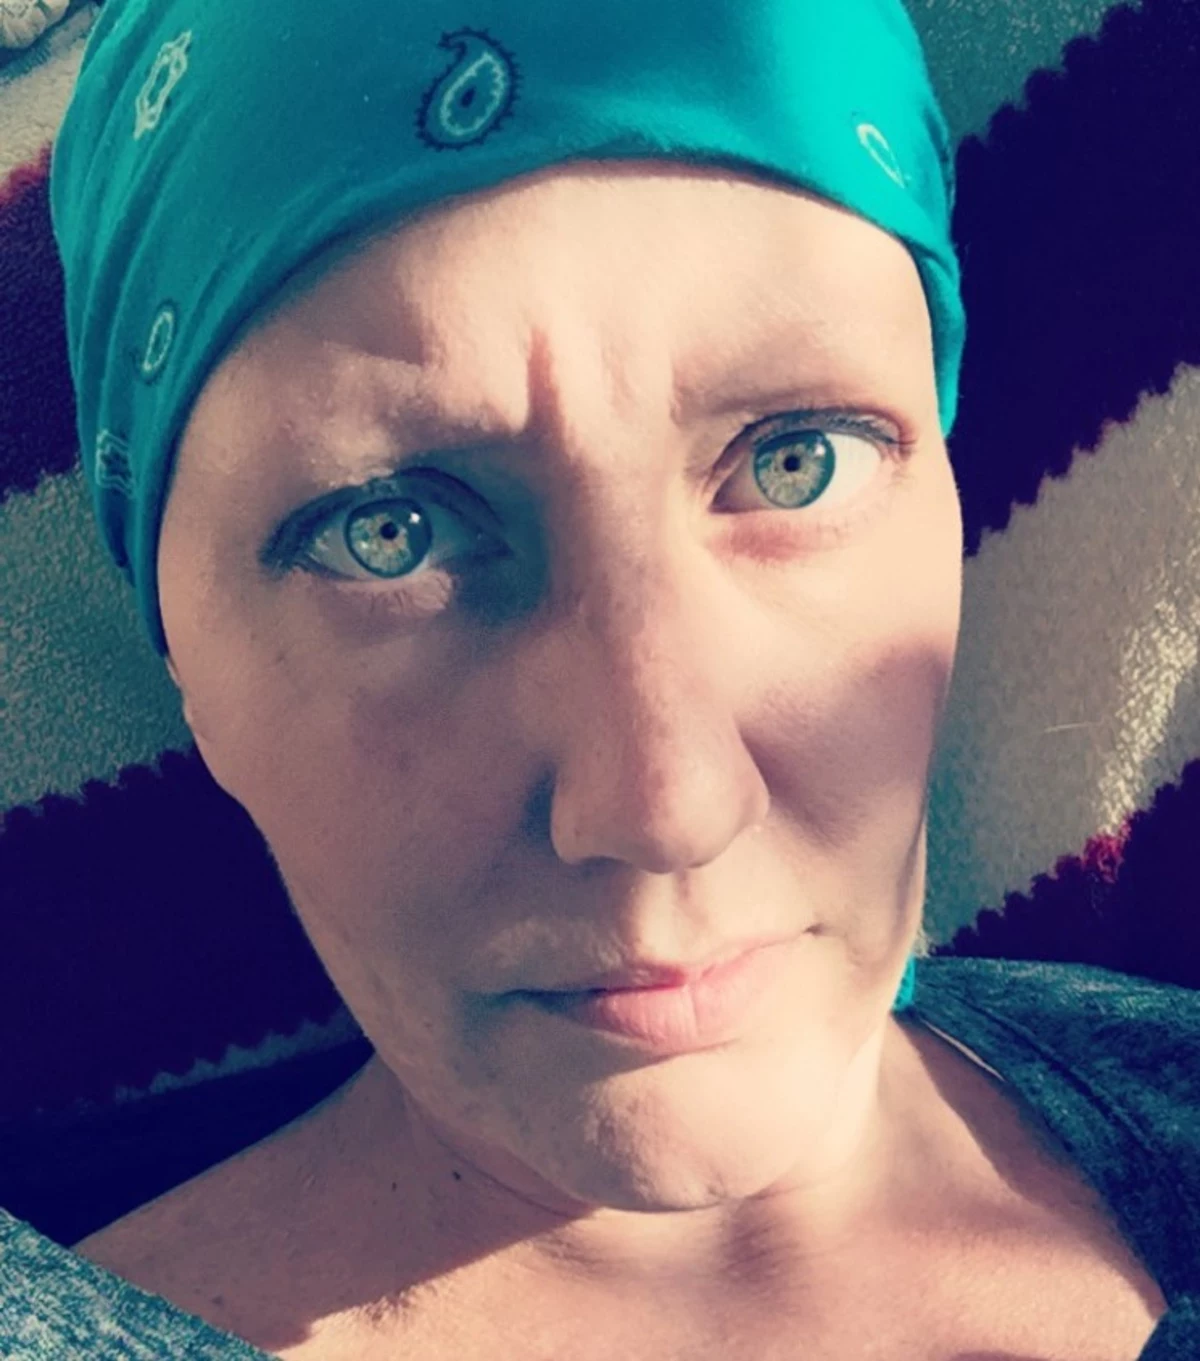 cny-woman-fighting-to-survive-after-breast-cancer-moves-to-brain